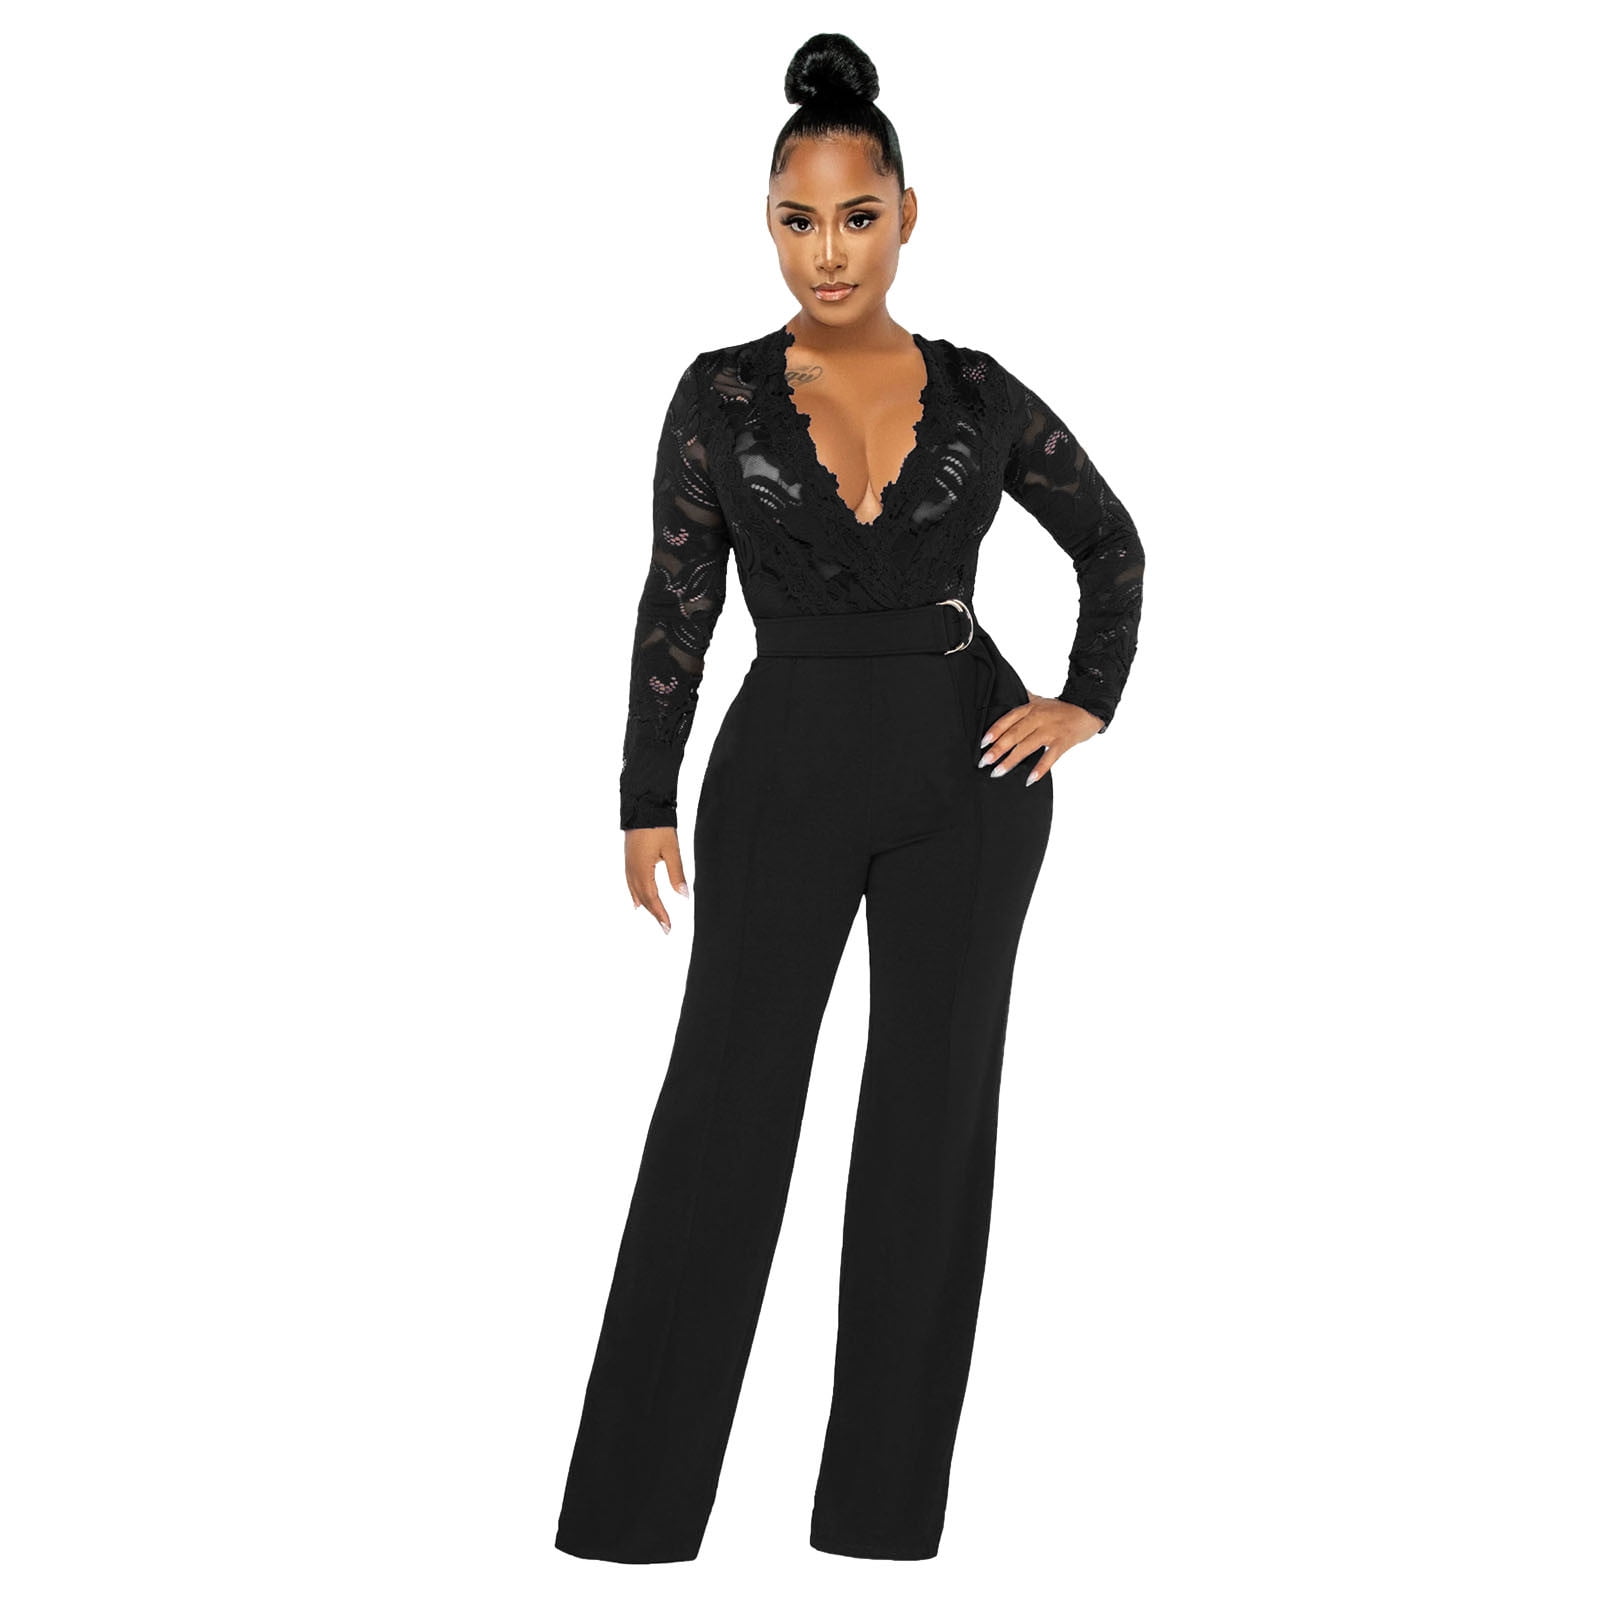 LBECLEY Jumpsuits for Women Jumpsuit Girls Women Long Sleeve Club Overalls  Lace Bodycon Romper Party Jumpsuits Rompers Women Casual Winter Rompers for Women  Black Xl 